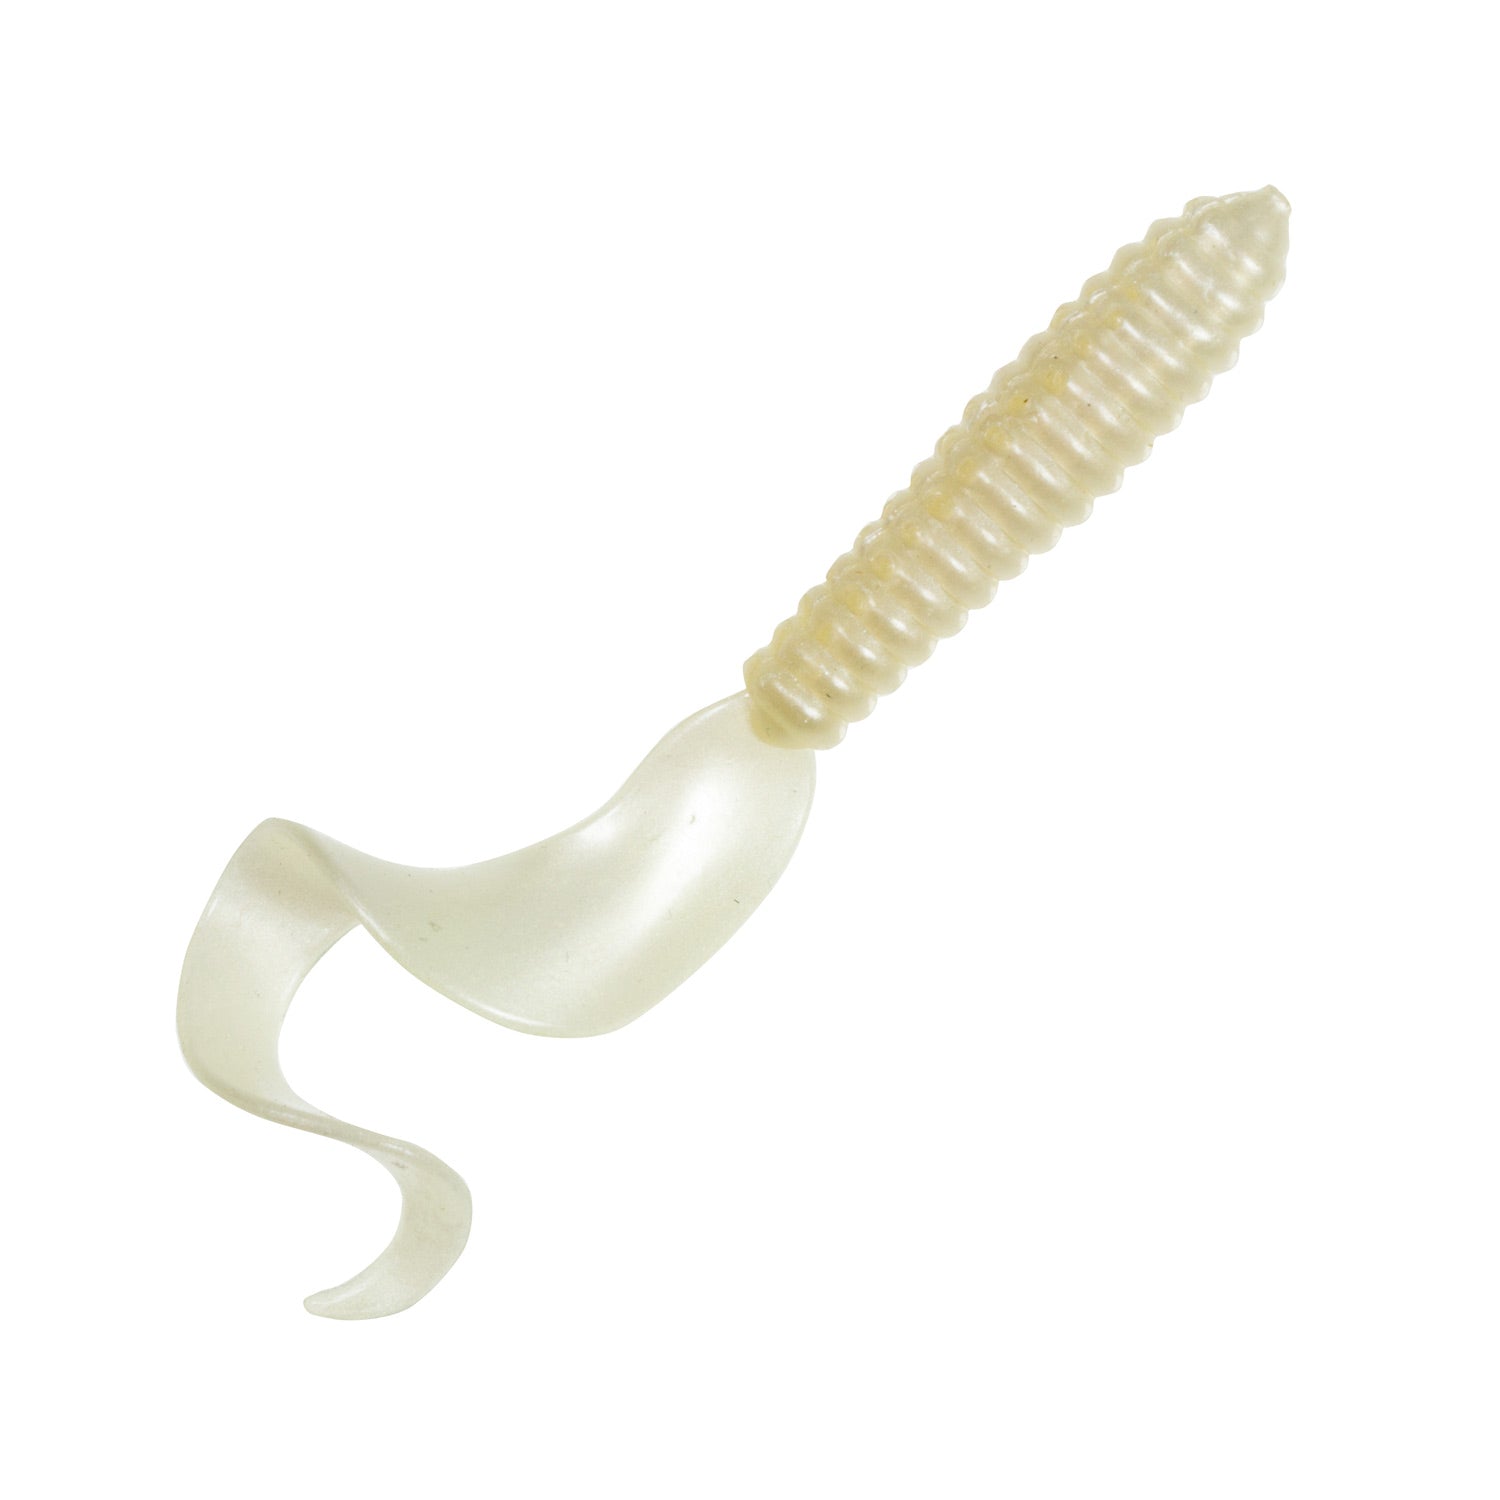 Charlie's Worms 4" Grub Pearl White